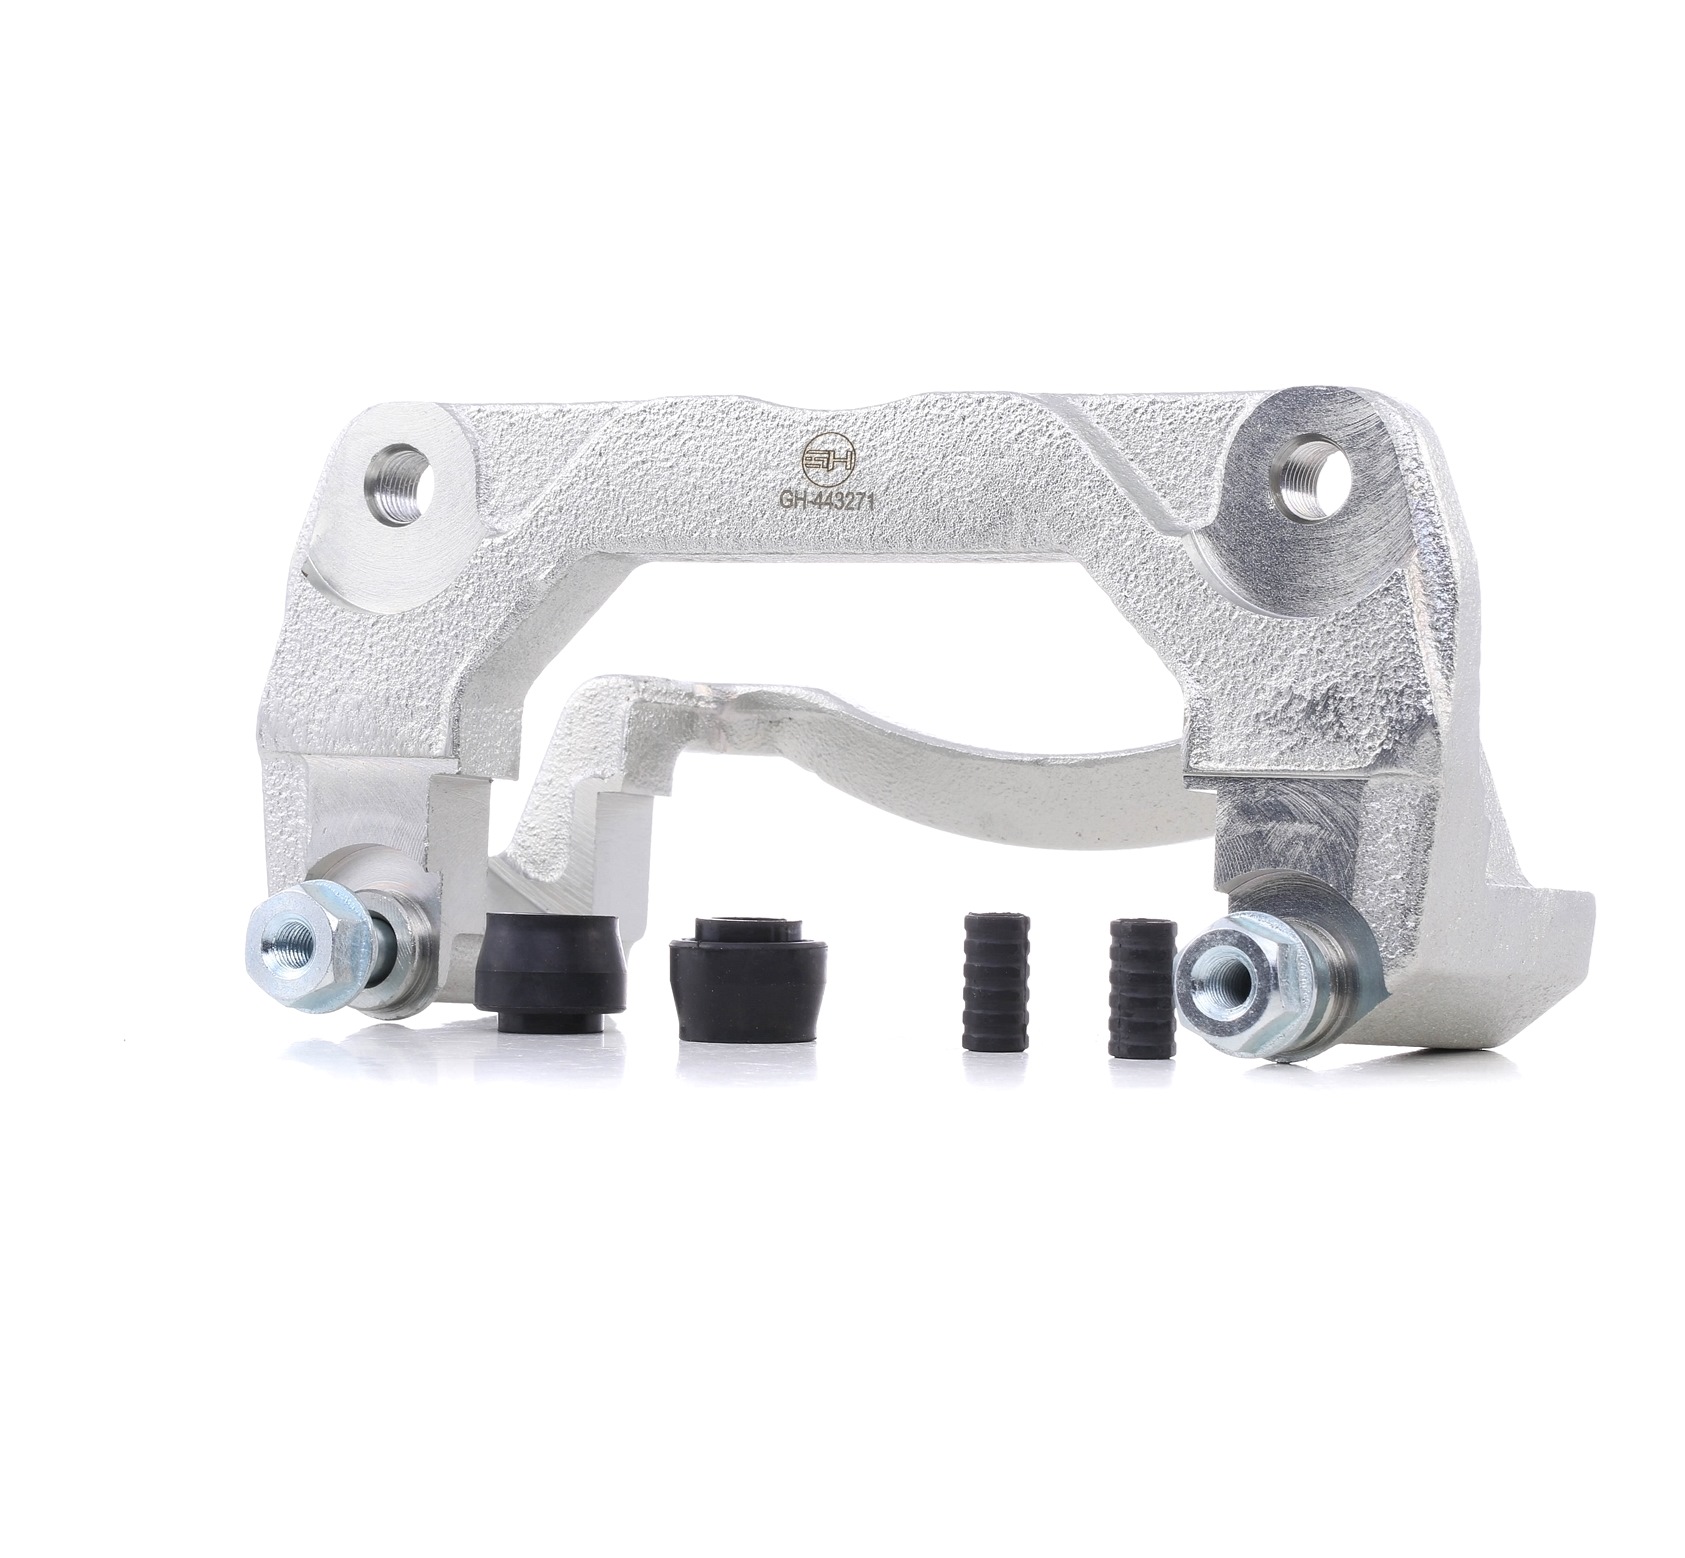 GH GH-443271 Carrier, brake caliper TOYOTA experience and price